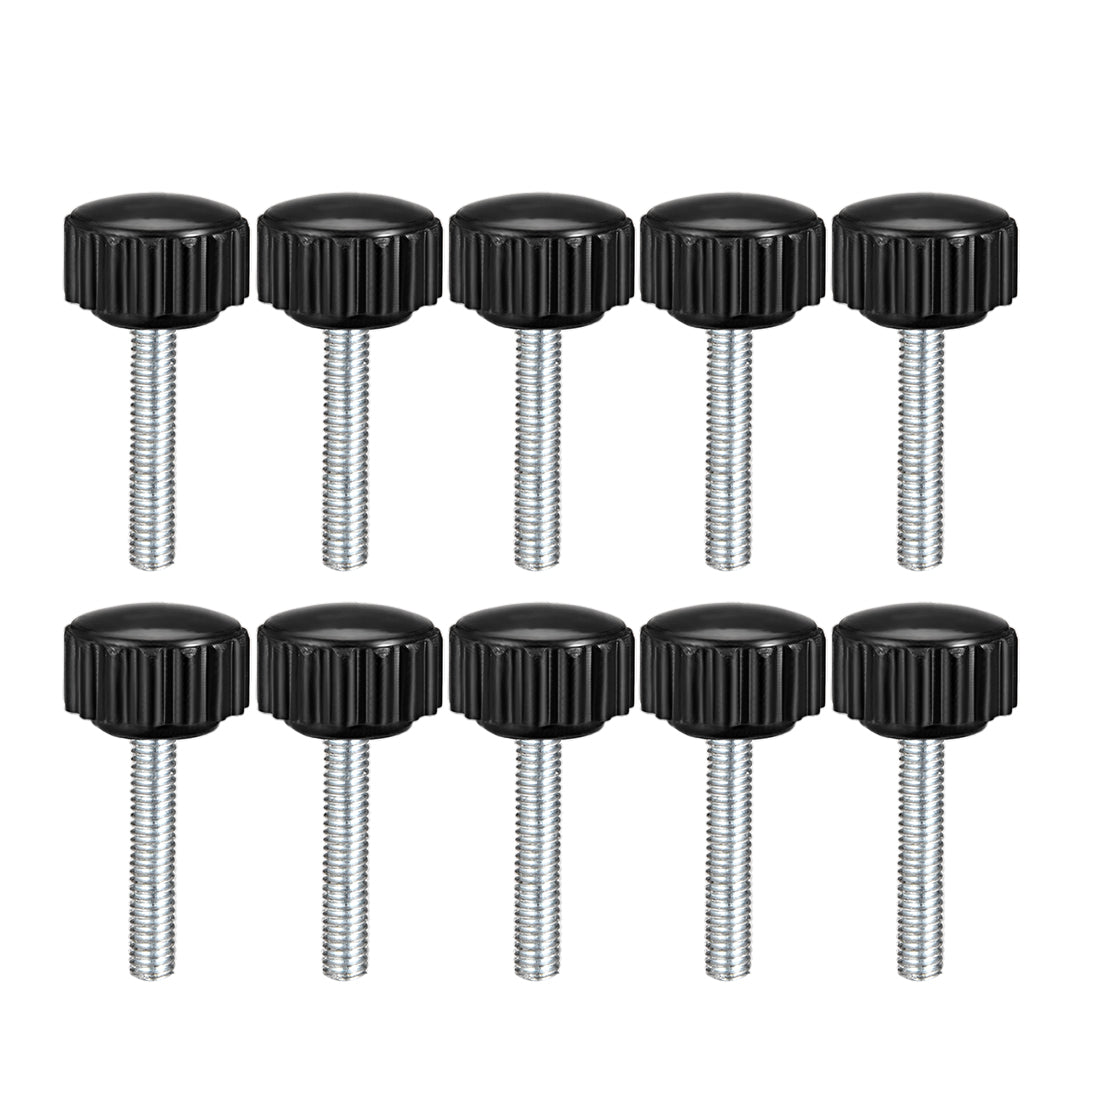 Uxcell Uxcell M6 x 20mm Male Thread Knurled Clamping Knobs Grip Thumb Screw on Type 10 Pcs